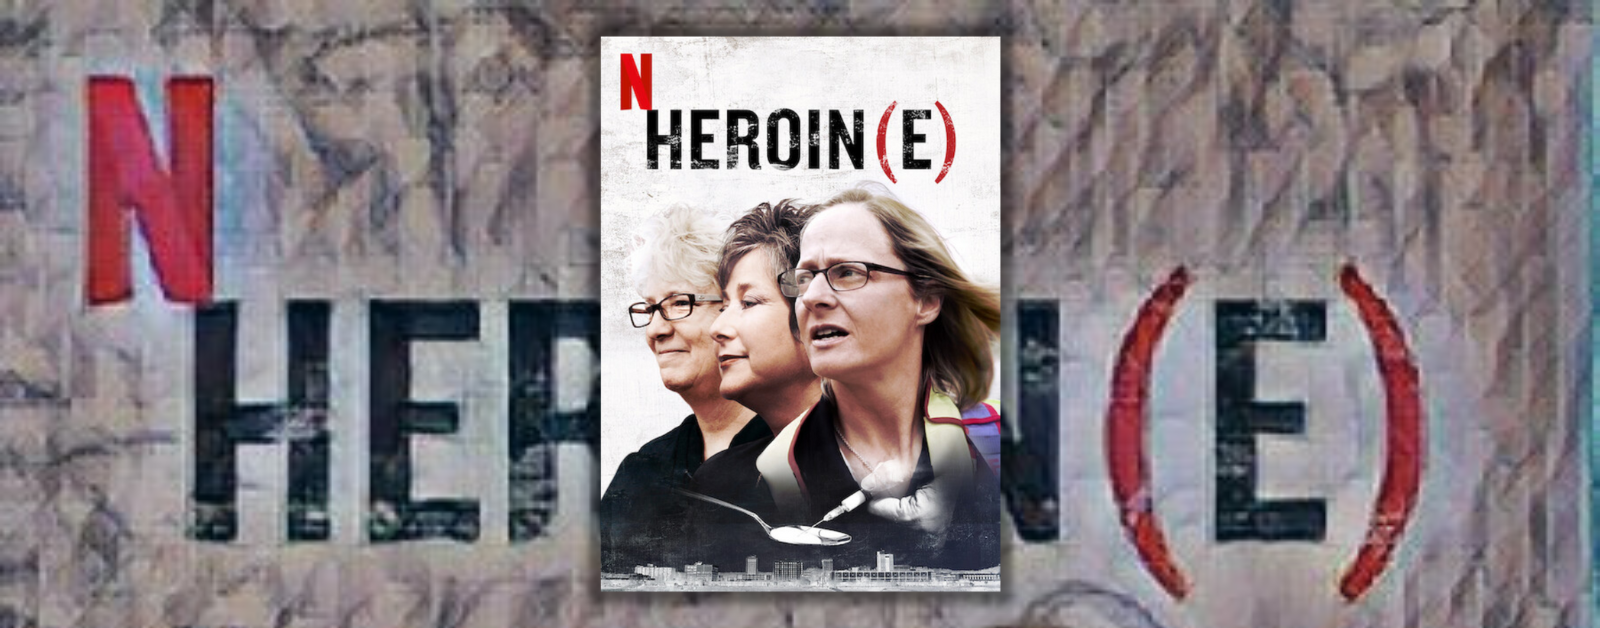 mosaic filter and the cover of the Netflix film Heroin(e)